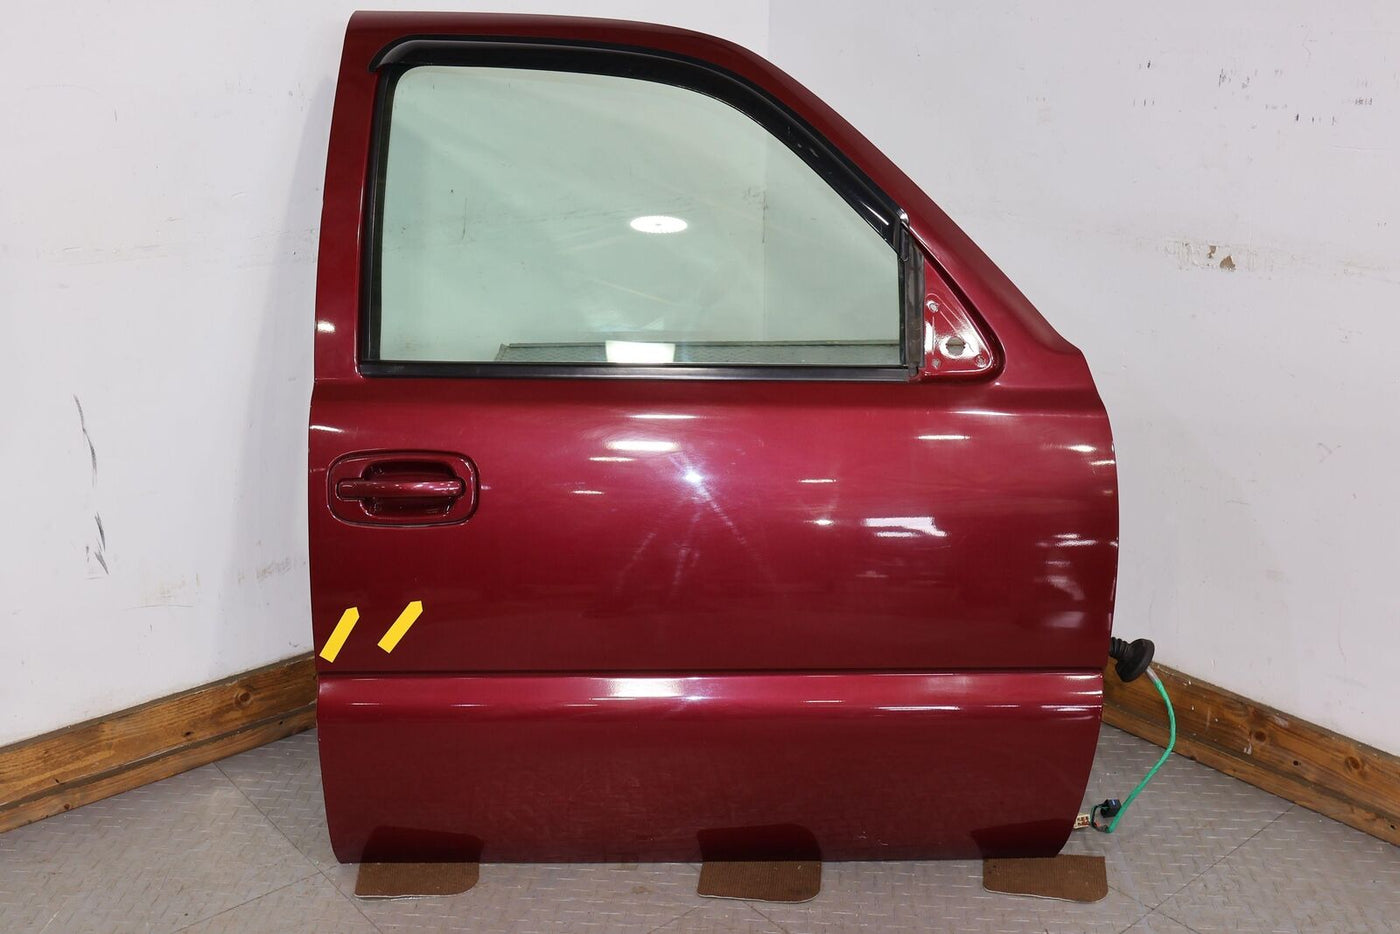 00-06 Tahoe/Silverado Front Right Electric Door W/ Glass (Sport Red 63u) Notes